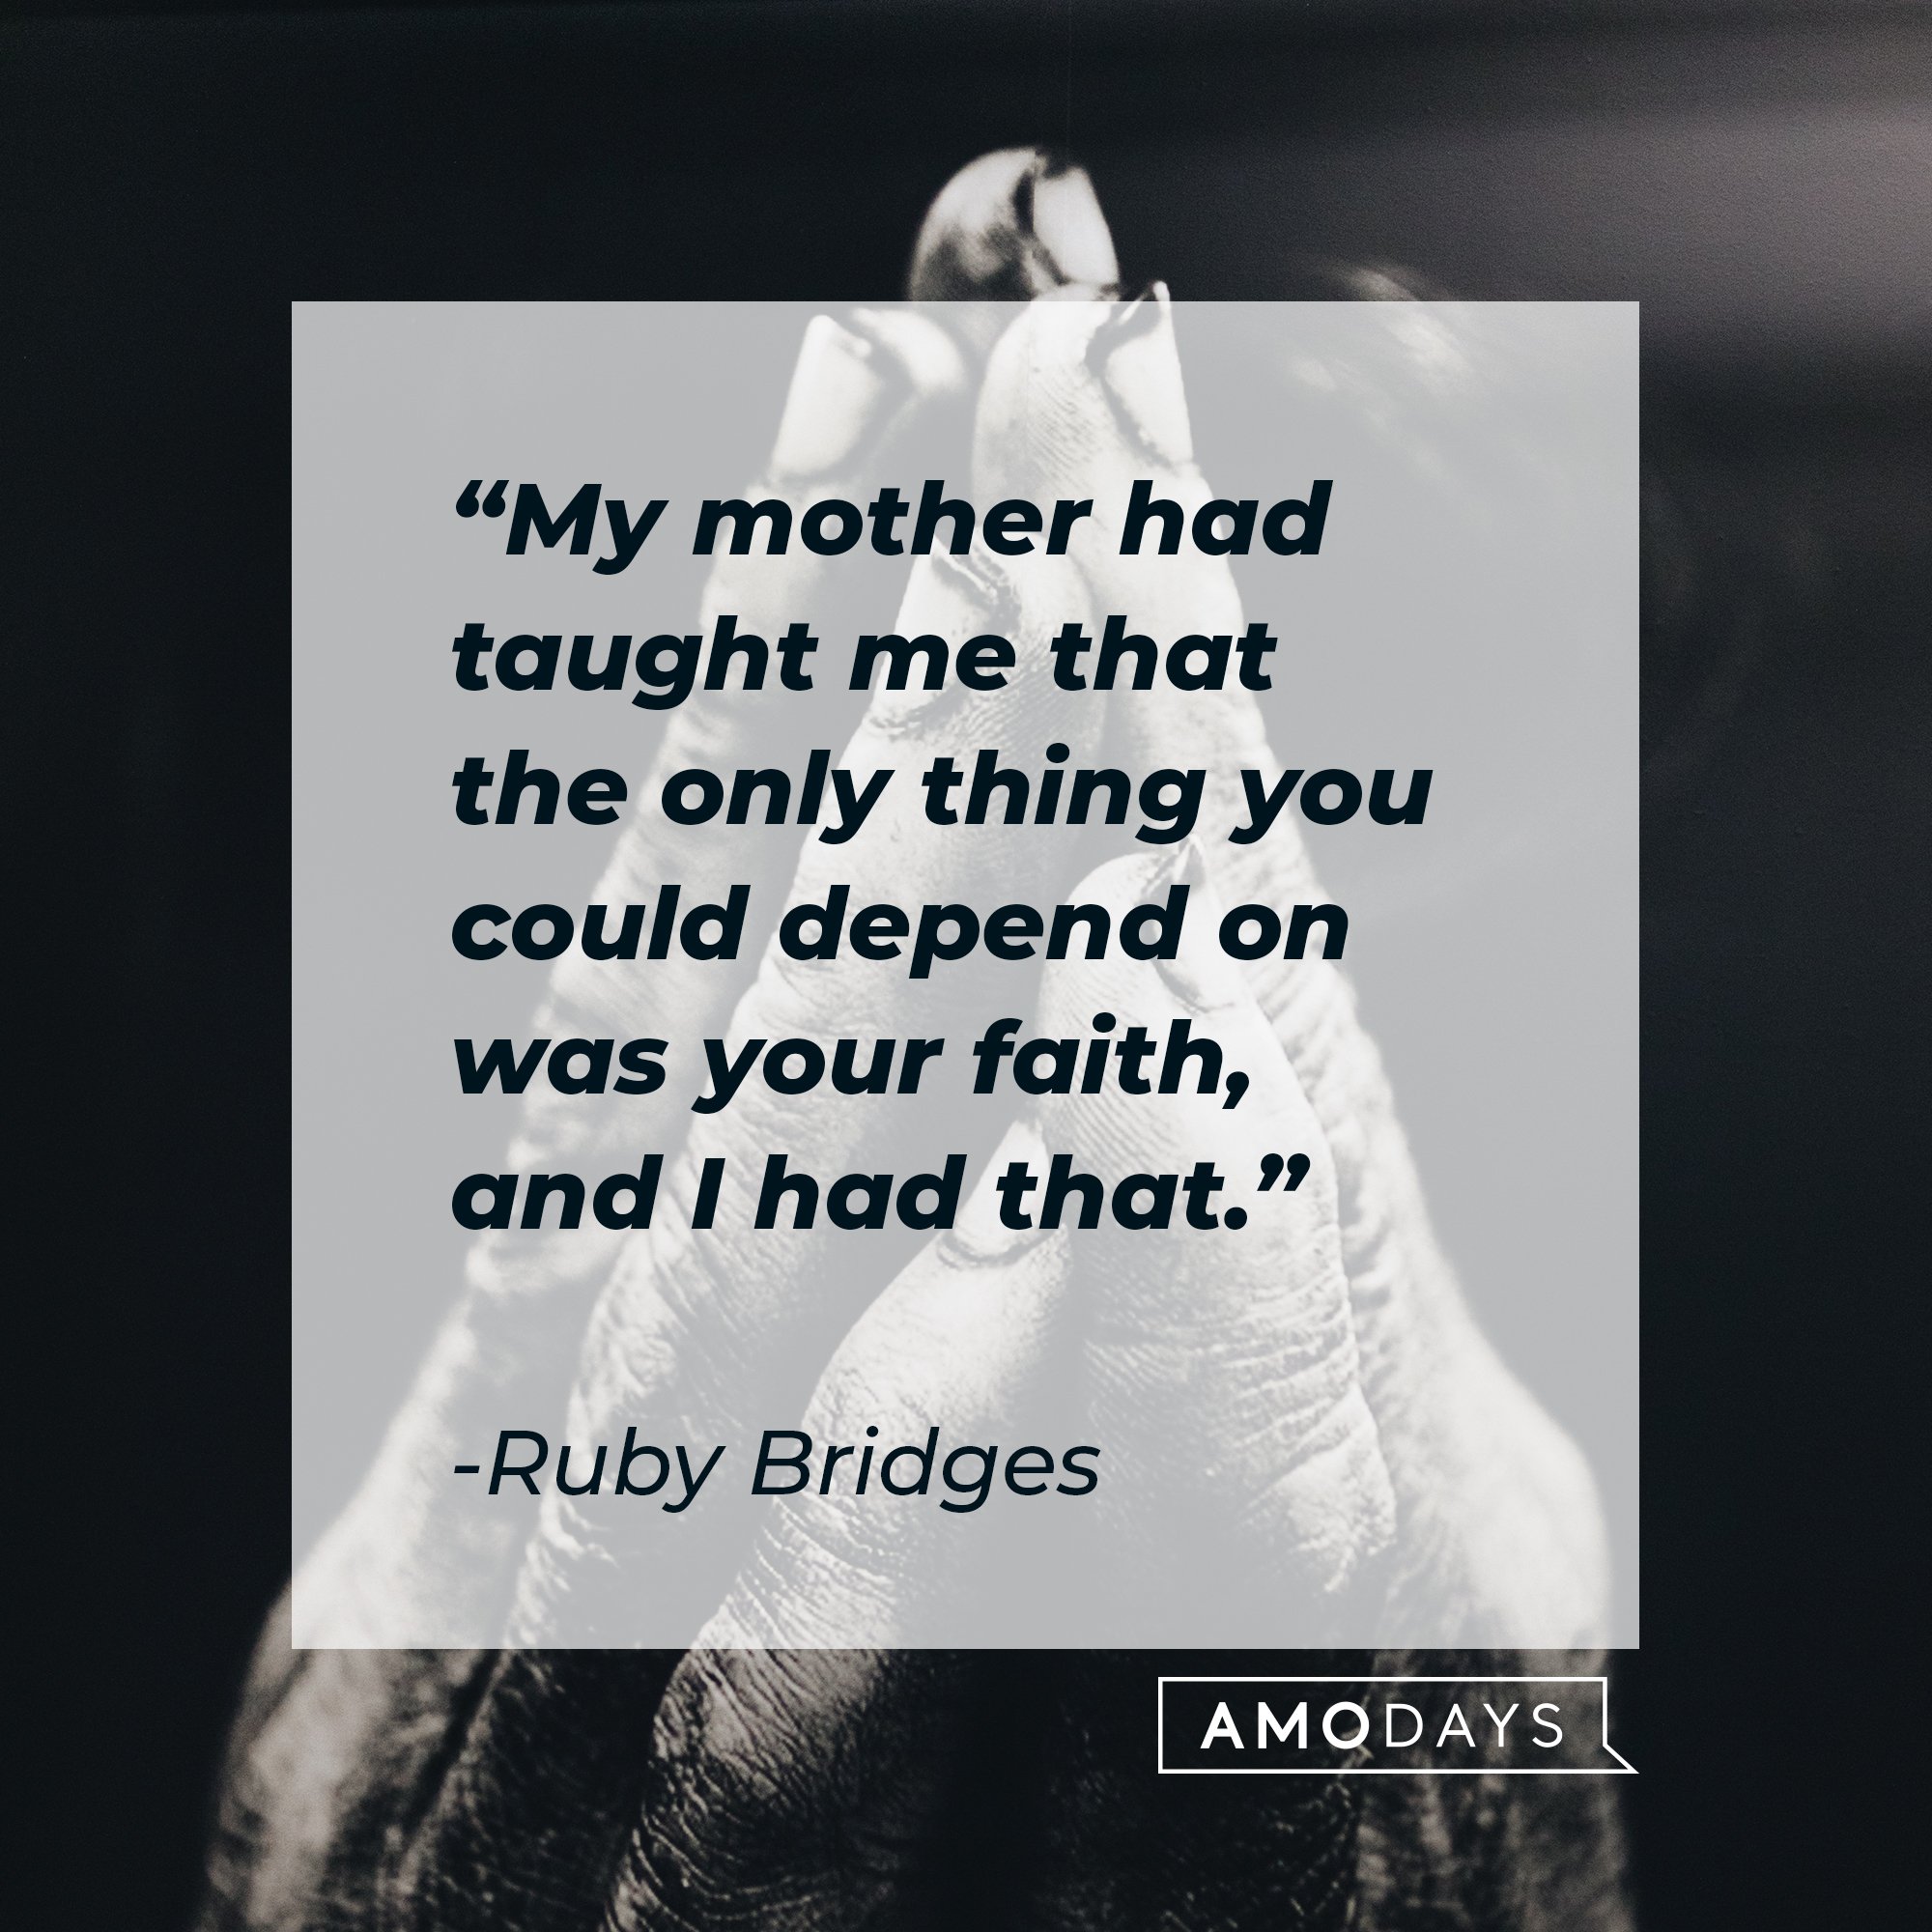 Ruby Bridges’ quote: "My mother had taught me that the only thing you could depend on was your faith, and I had that.” | Image: AmoDays 